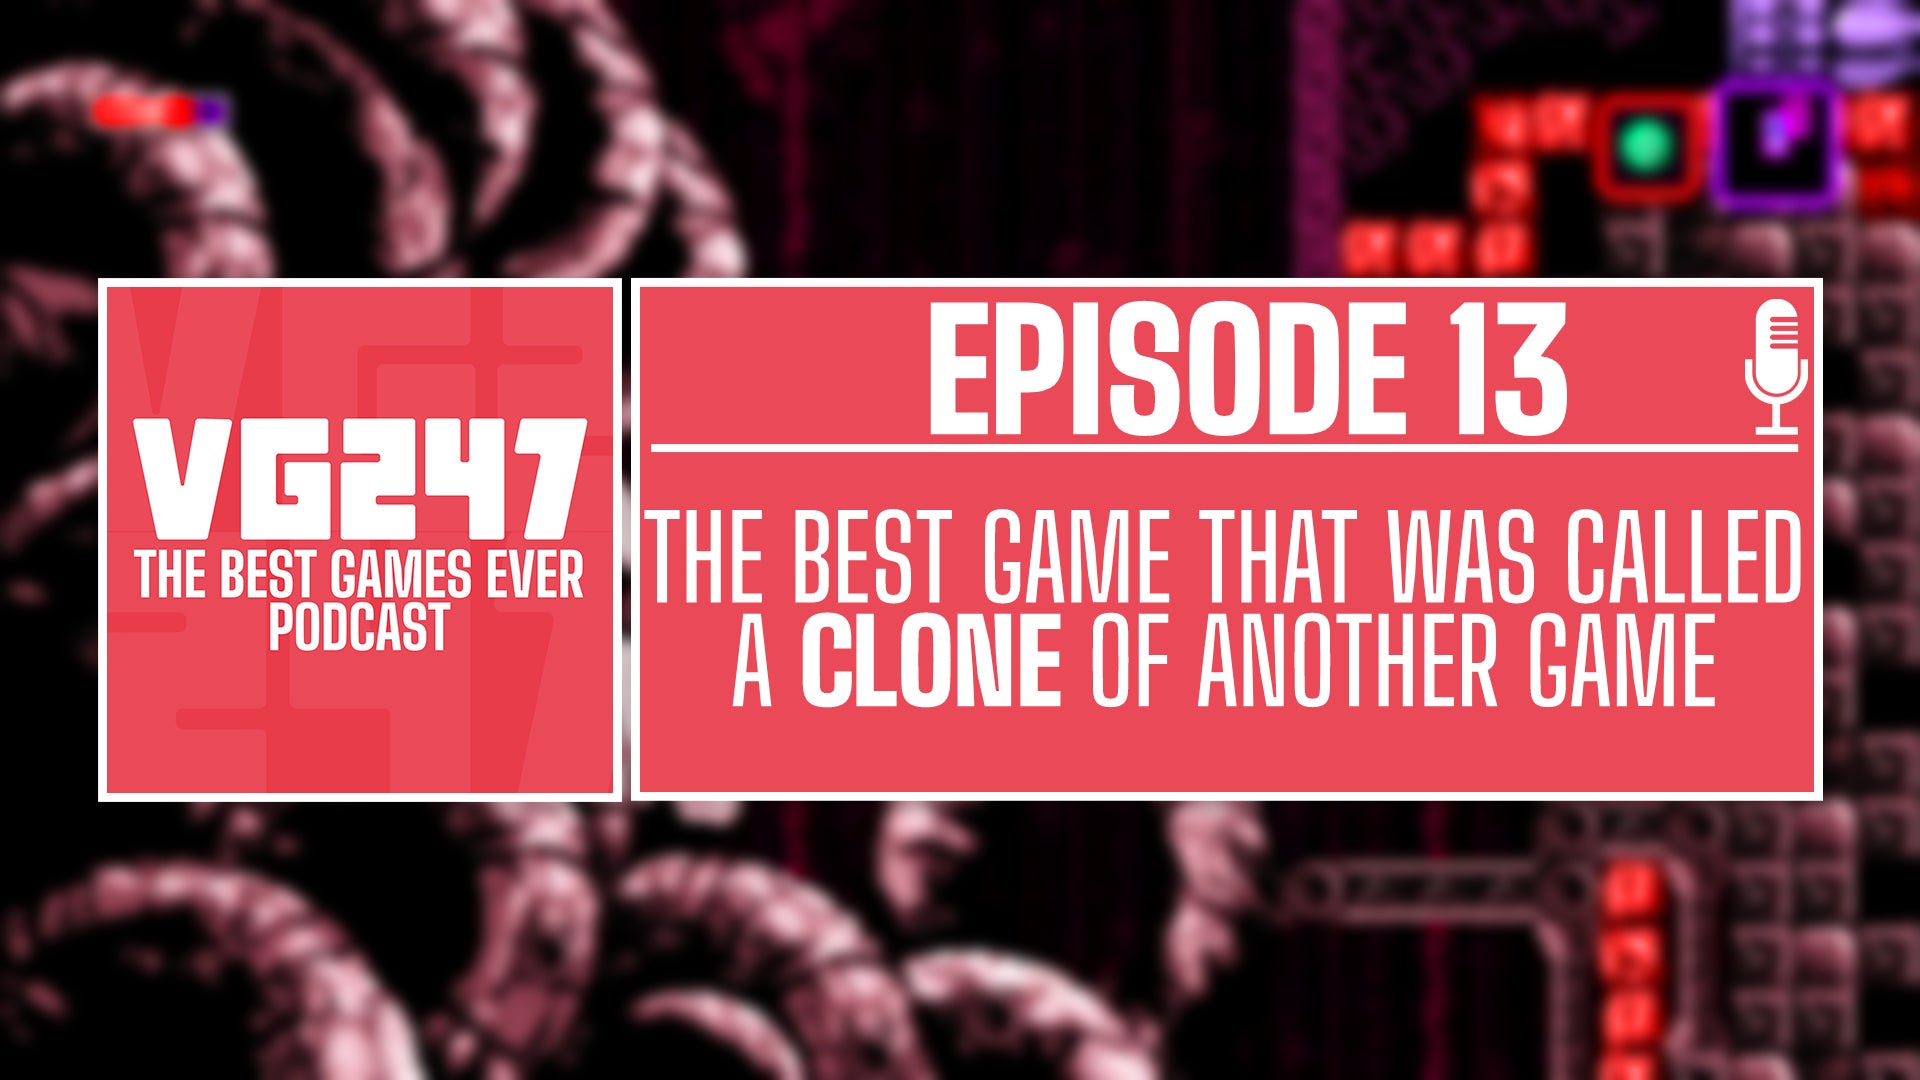 VG247's The Best Games Ever Podcast – Ep.13: Best game that was called a clone of another game